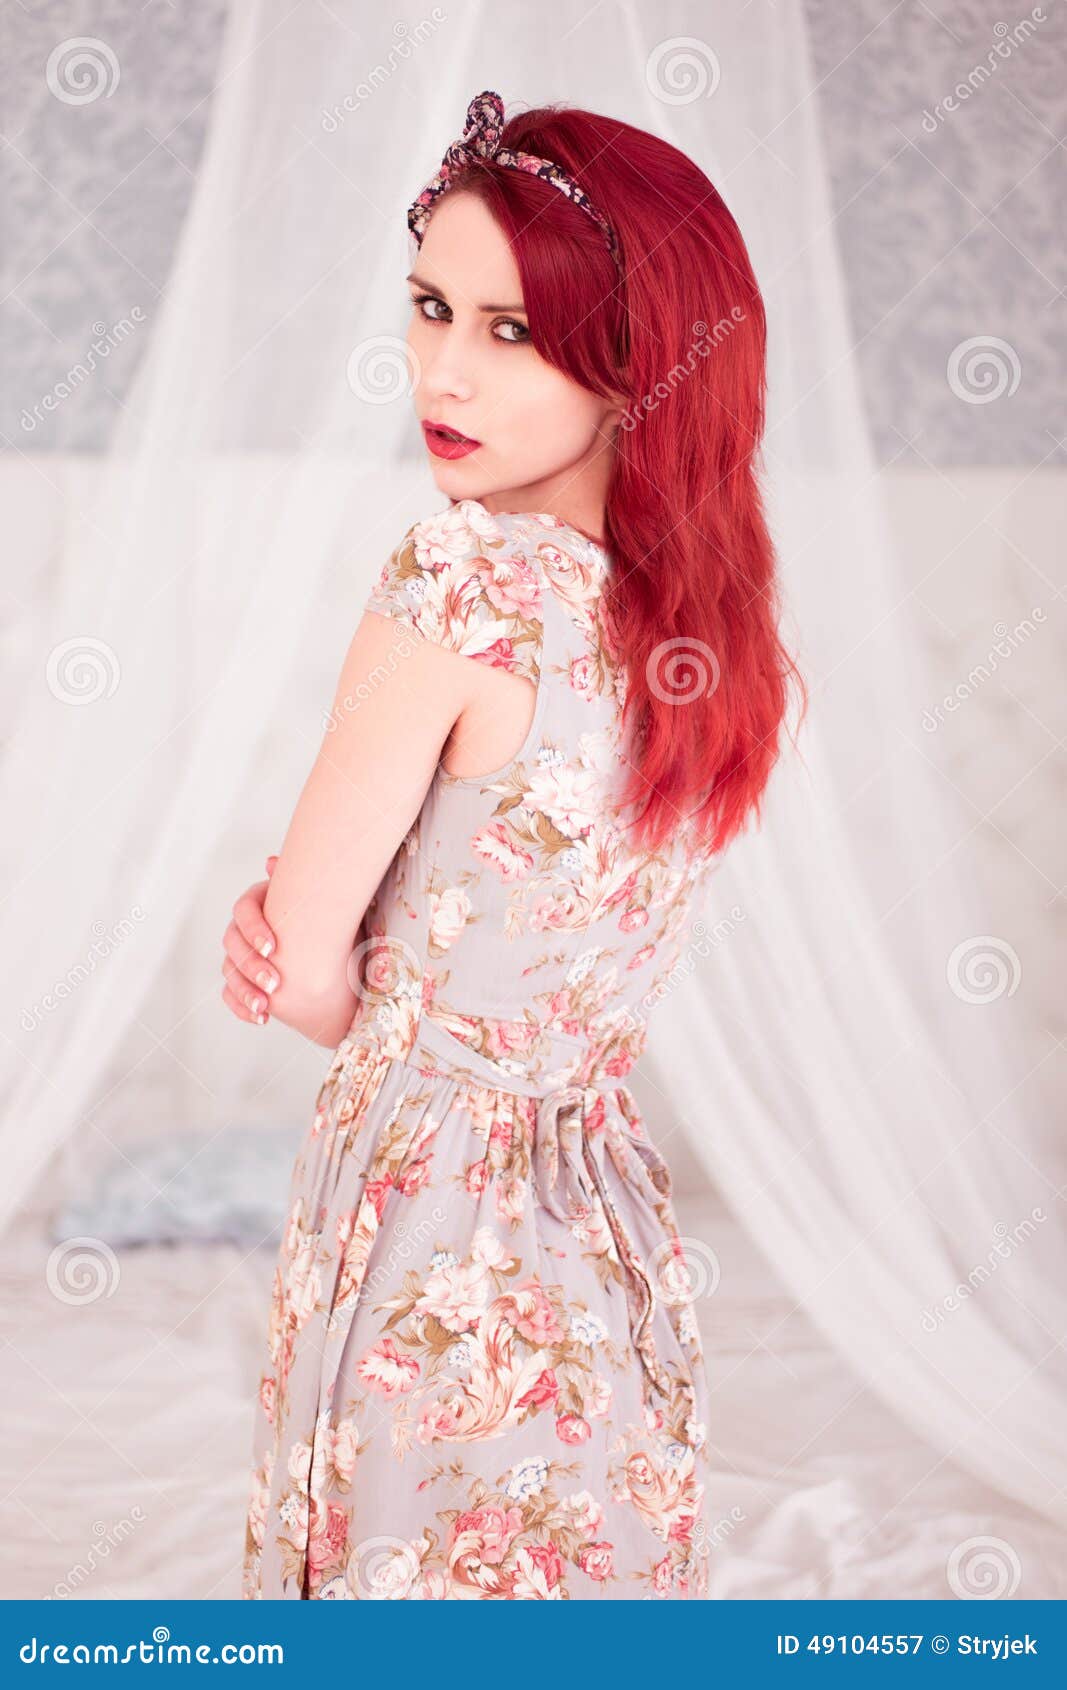 Young Redhead Woman with a Sultry Expression Stock Image - Image of pretty,  summer: 49104557